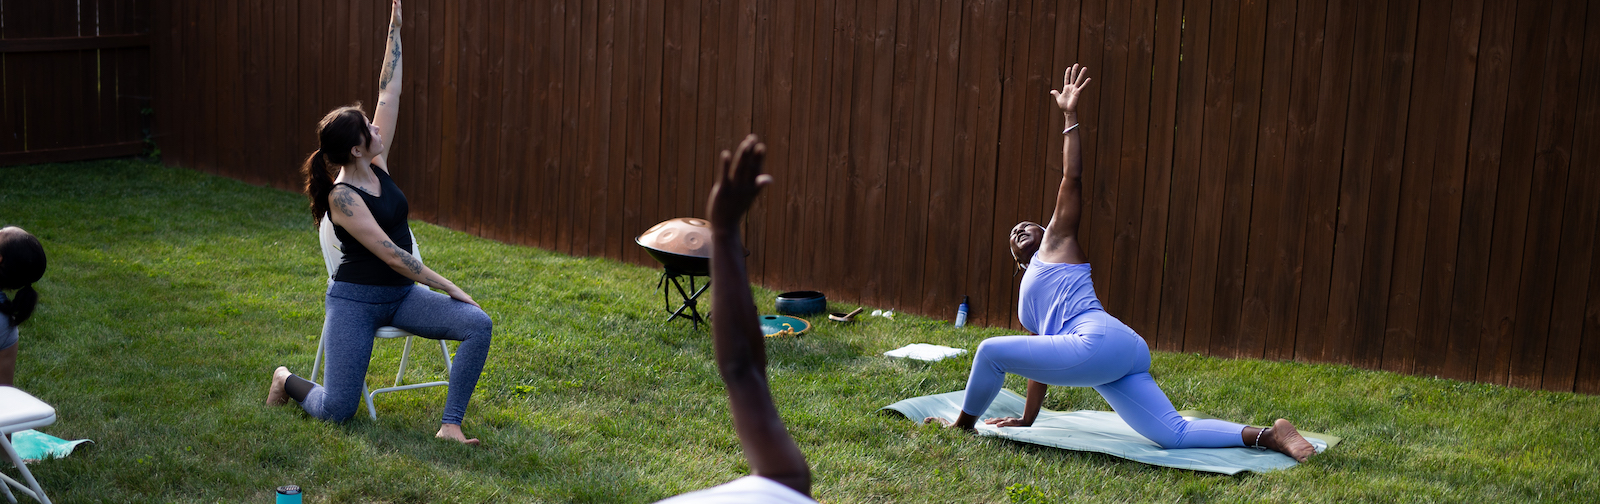 Diane Rogers, right, and Haley Evans, left, lead a Rooted Connection yoga class in South East Fort Wayne.